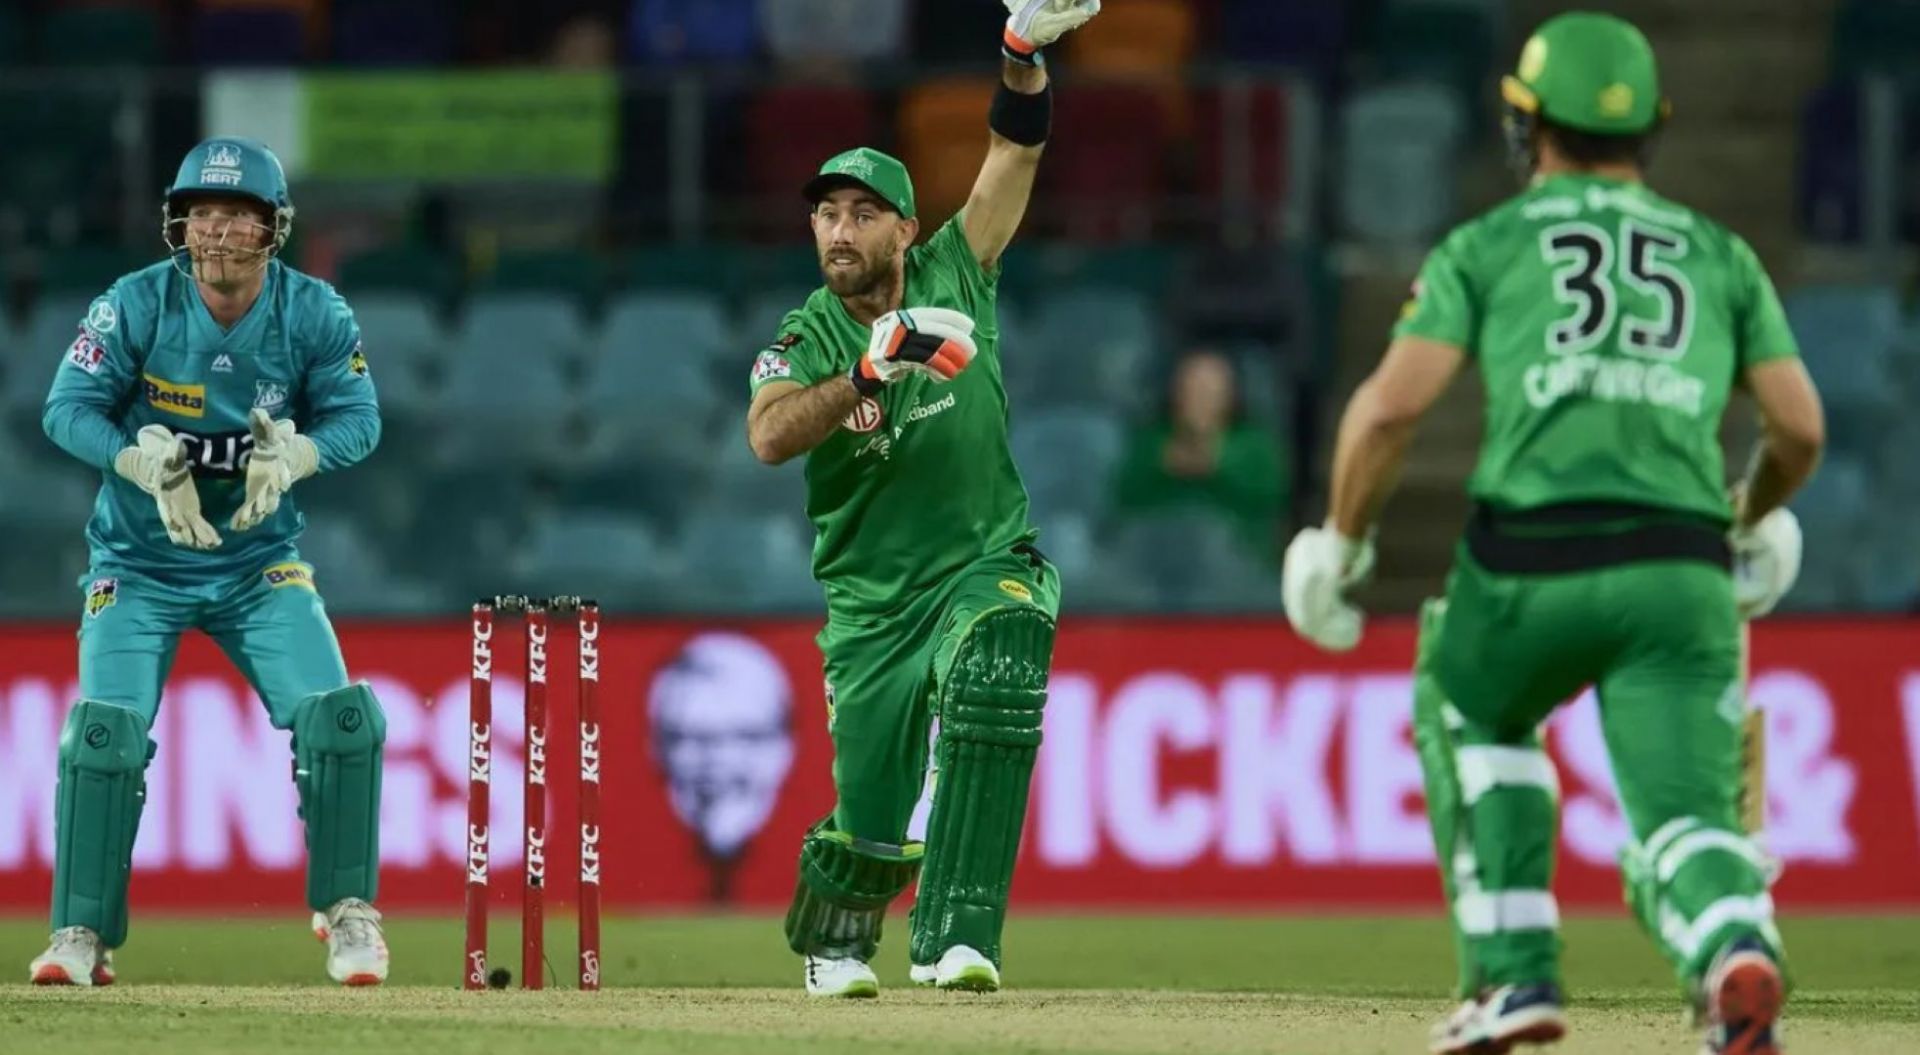 It might be a task too much even for Glenn Maxwell to propel the Stars to the playoffs.